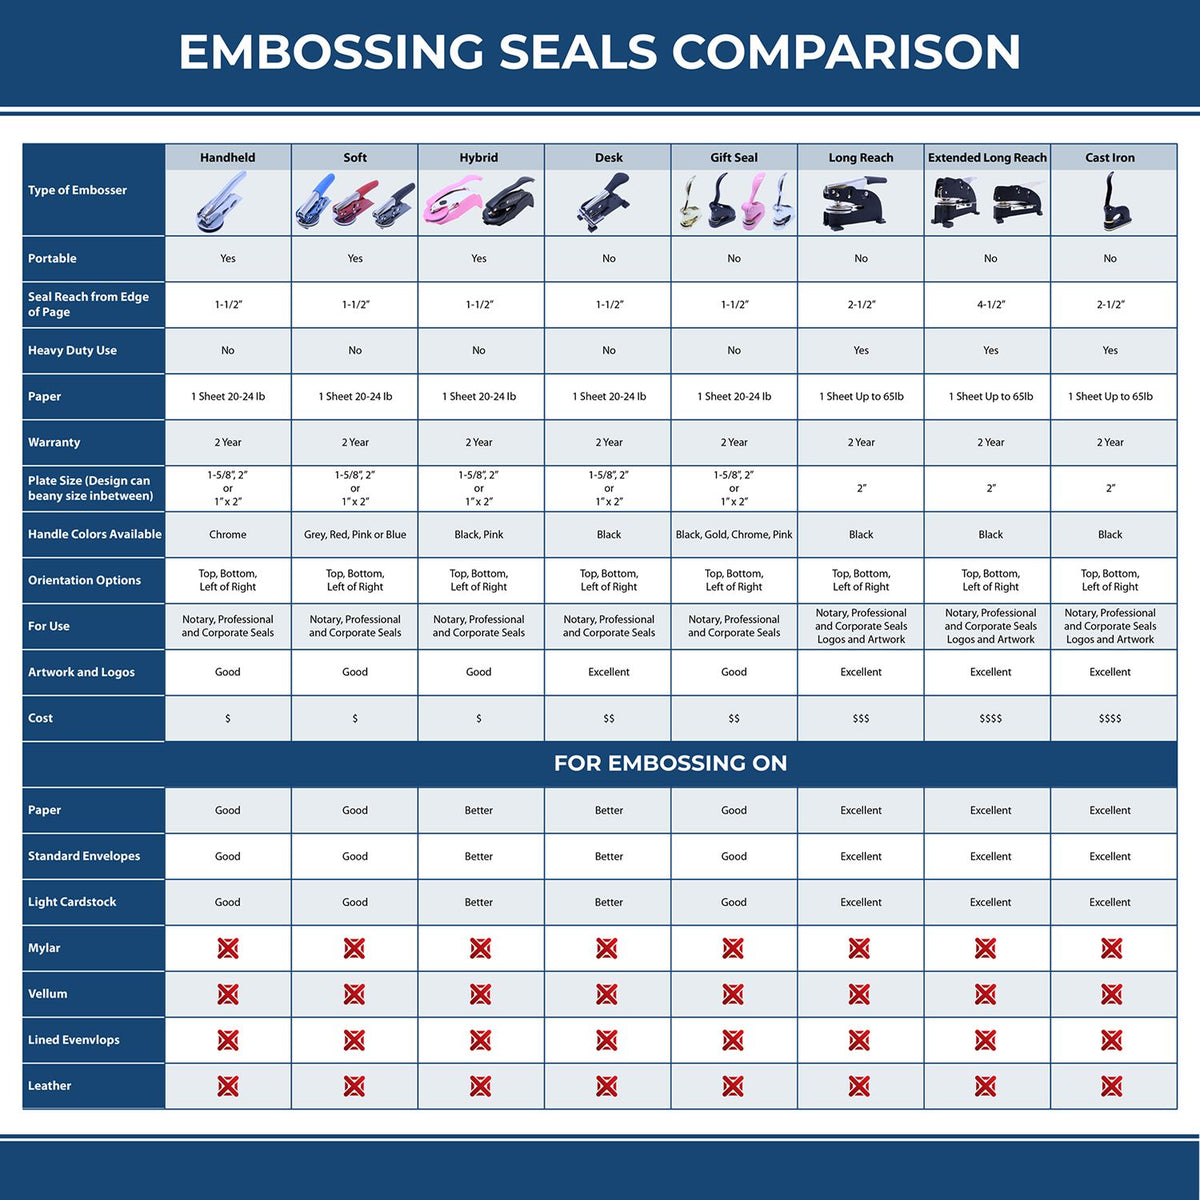 A comparison chart for the different types of mount models available for the Handheld Arizona Land Surveyor Seal.